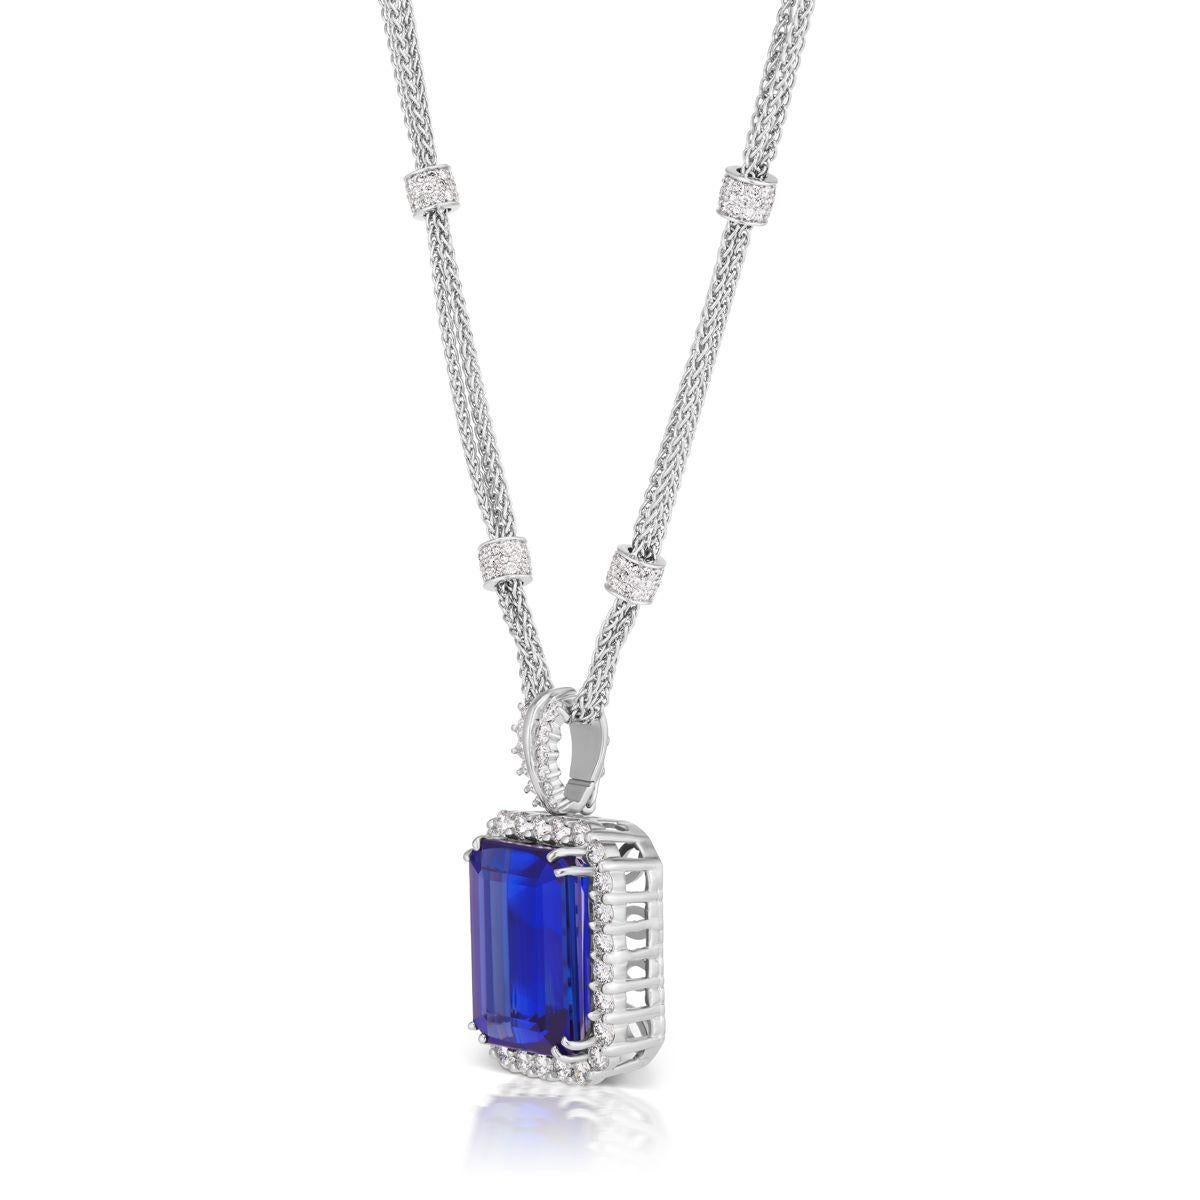 18k White Gold 43.25ct Tanzanite and 6.00 ct Diamond Pendant

A substantial gold chain with diamond stations provides the perfect
backdrop for a classic Tanzanite pendant.
Item: # 01336
Metal: 18k W
Color Weight: 43.25 ct.
Diamond Weight: 6.00 ct.